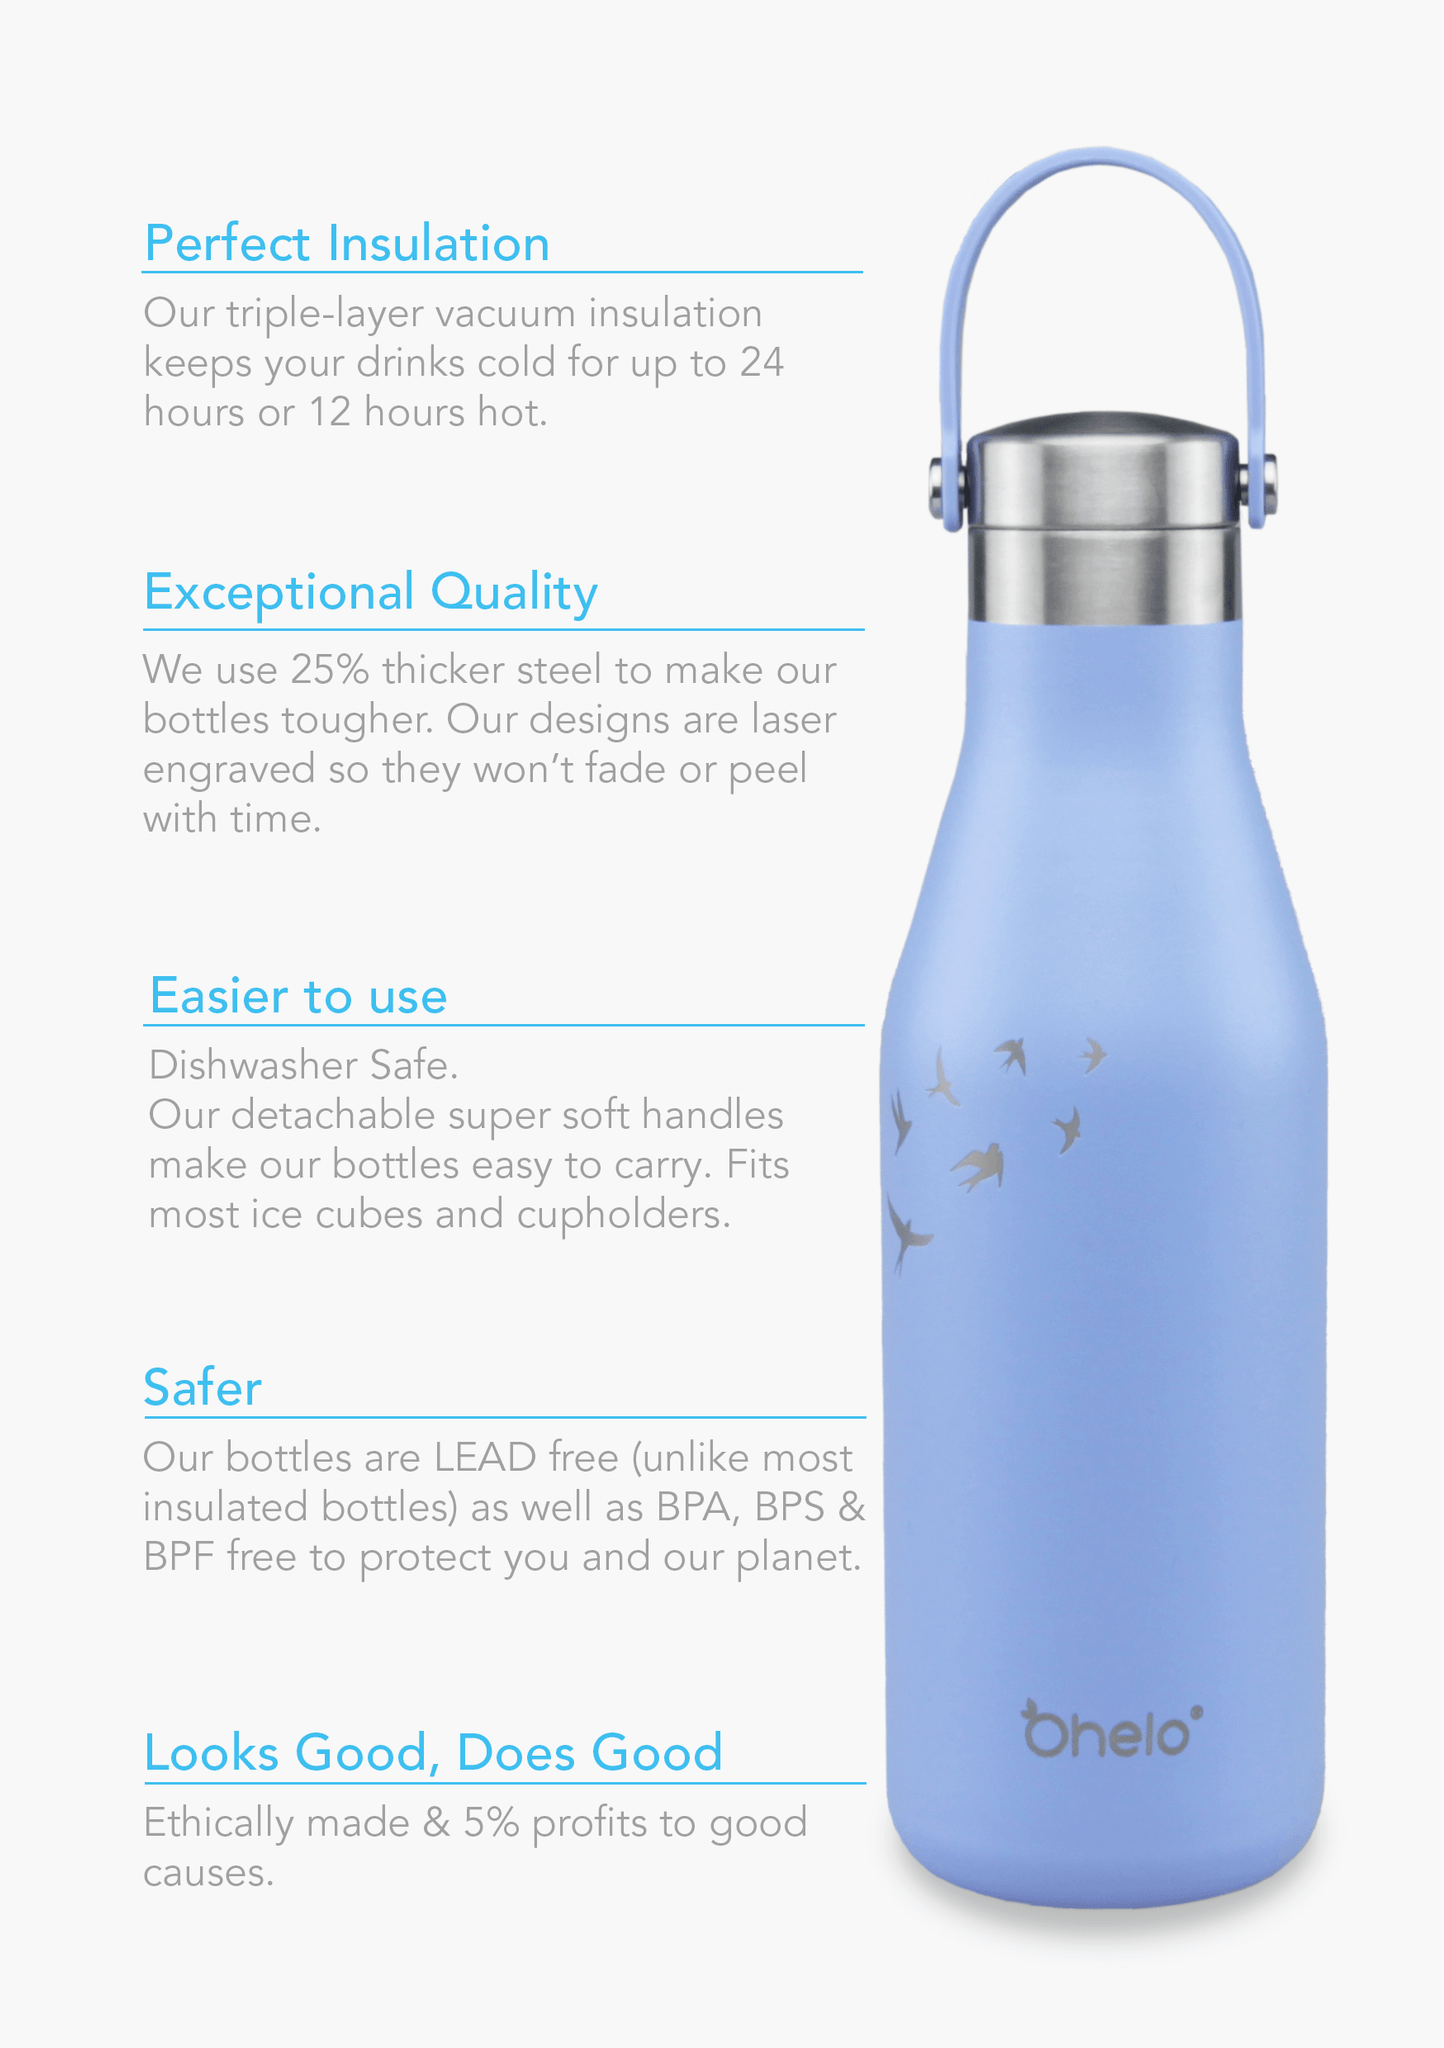 Poster showing Ohelo bottle qualities and USPs 